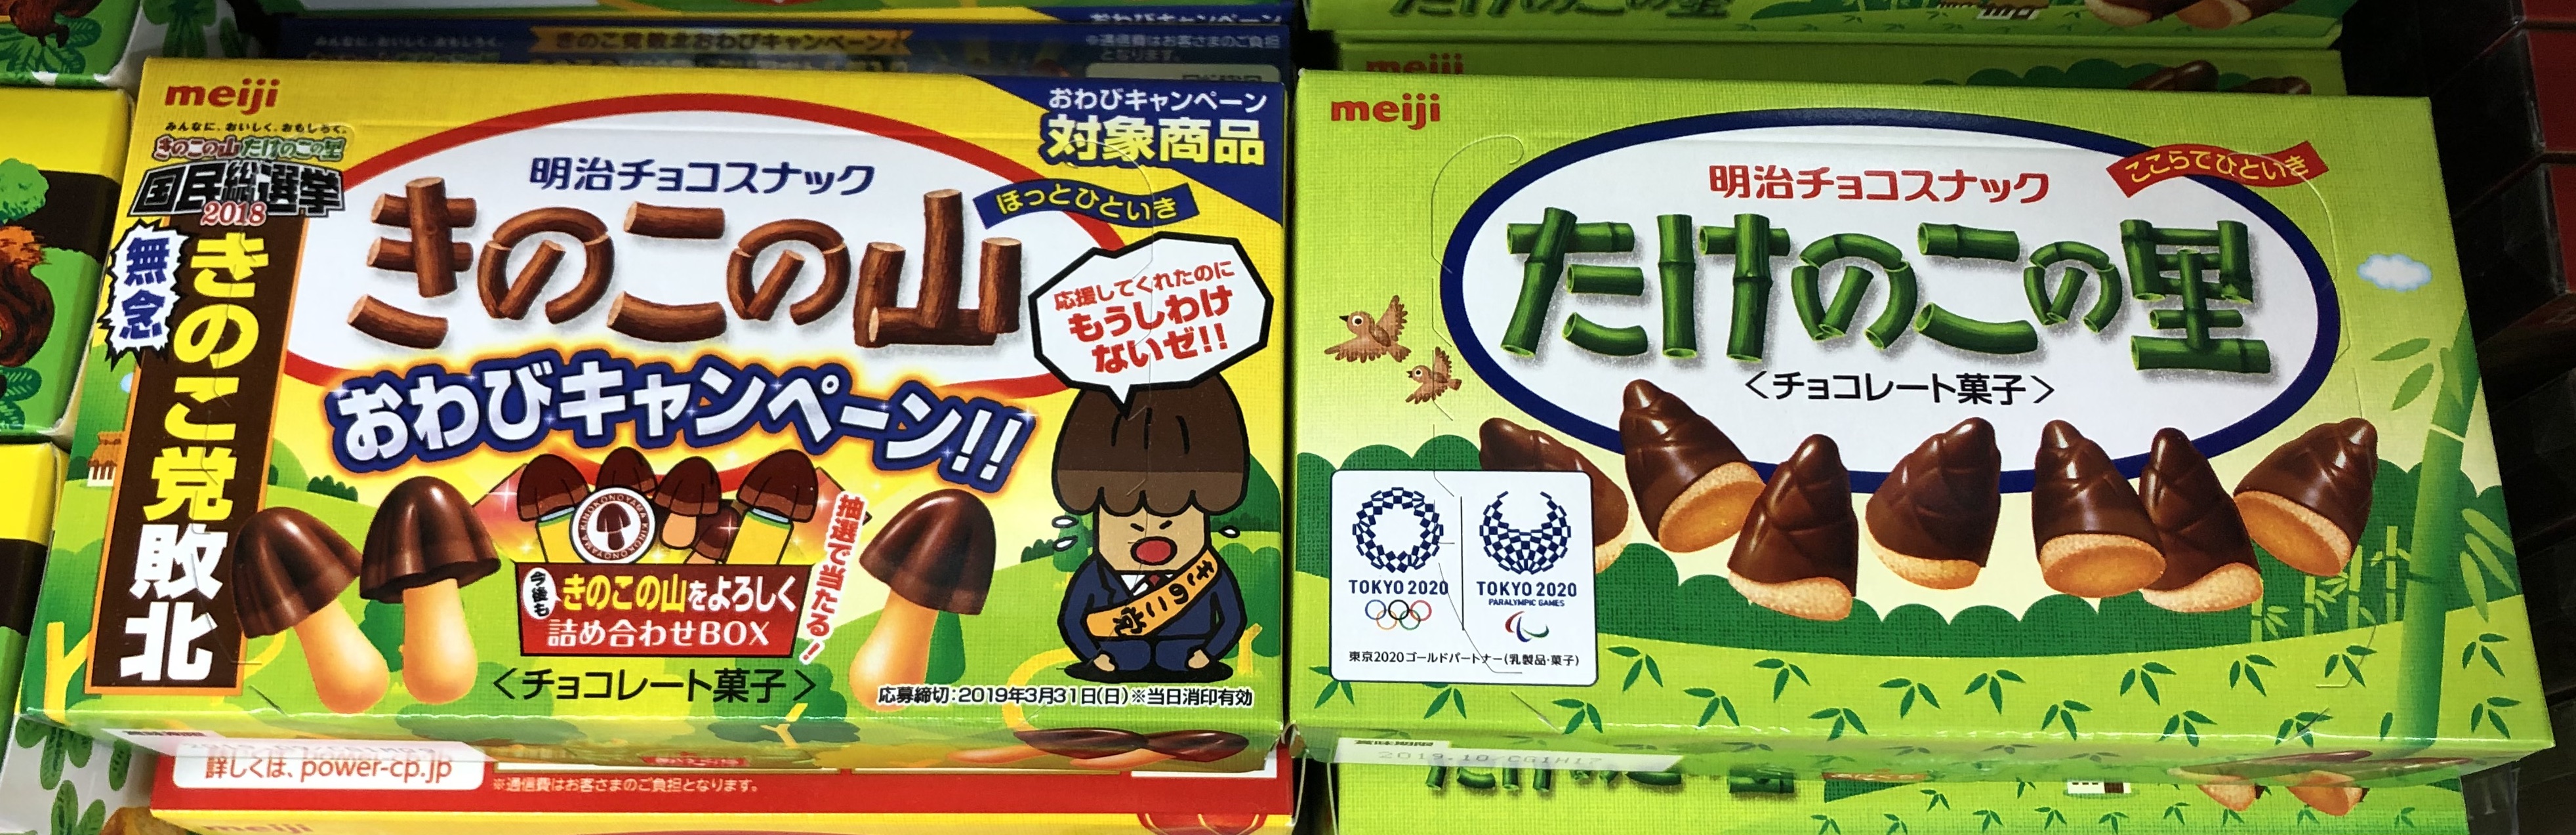 imported chocolate brands